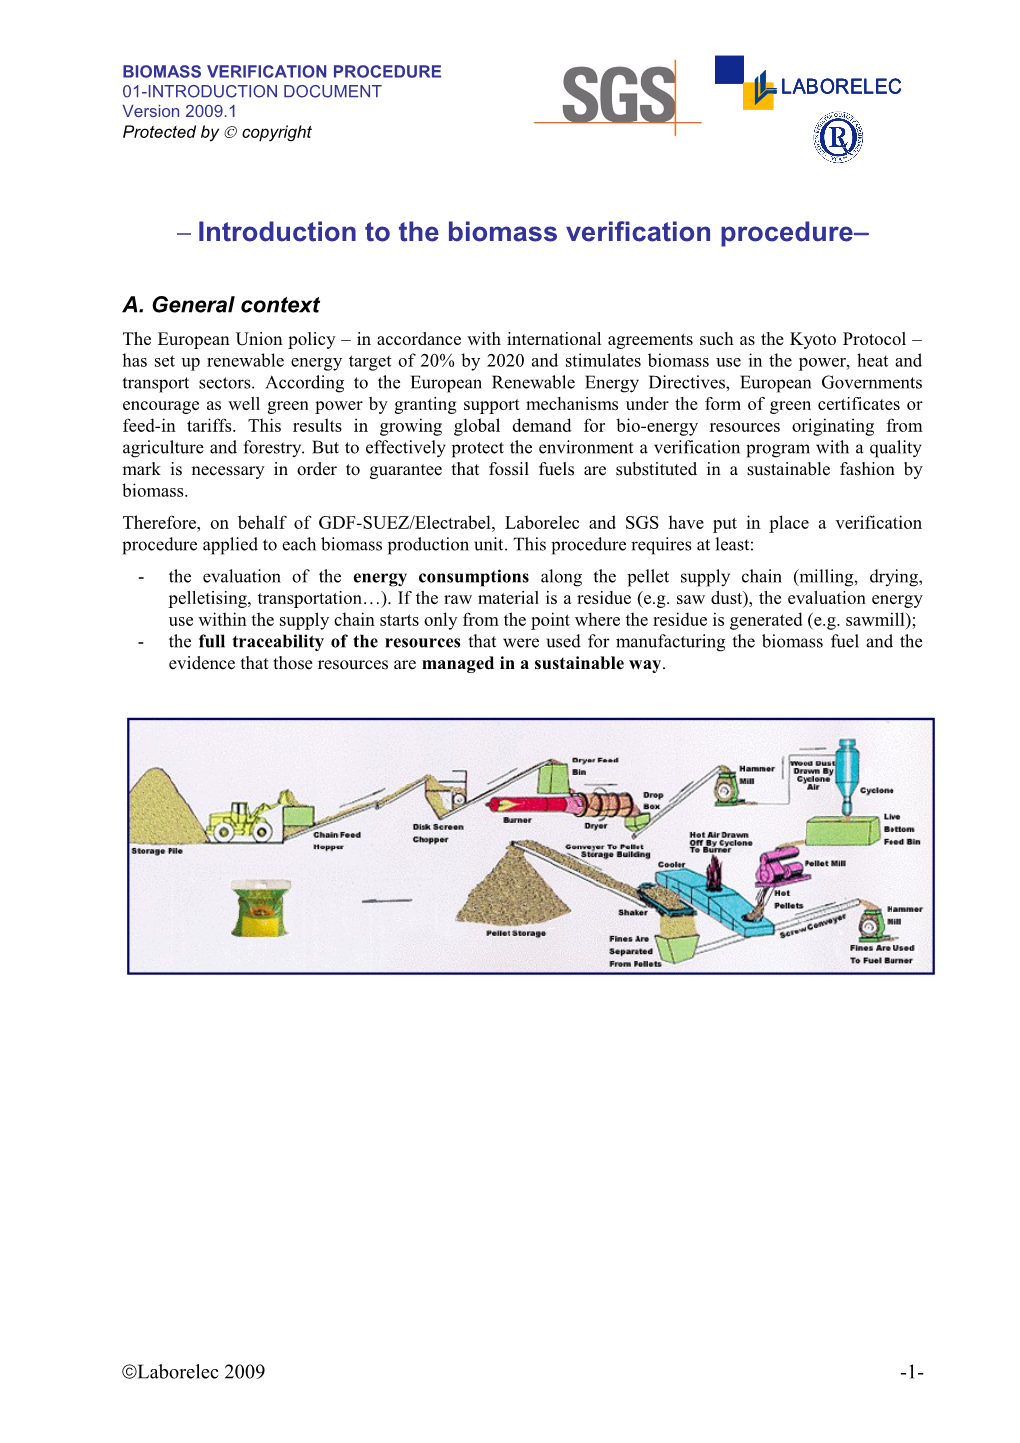 Introduction to the Biomass Verification Procedure